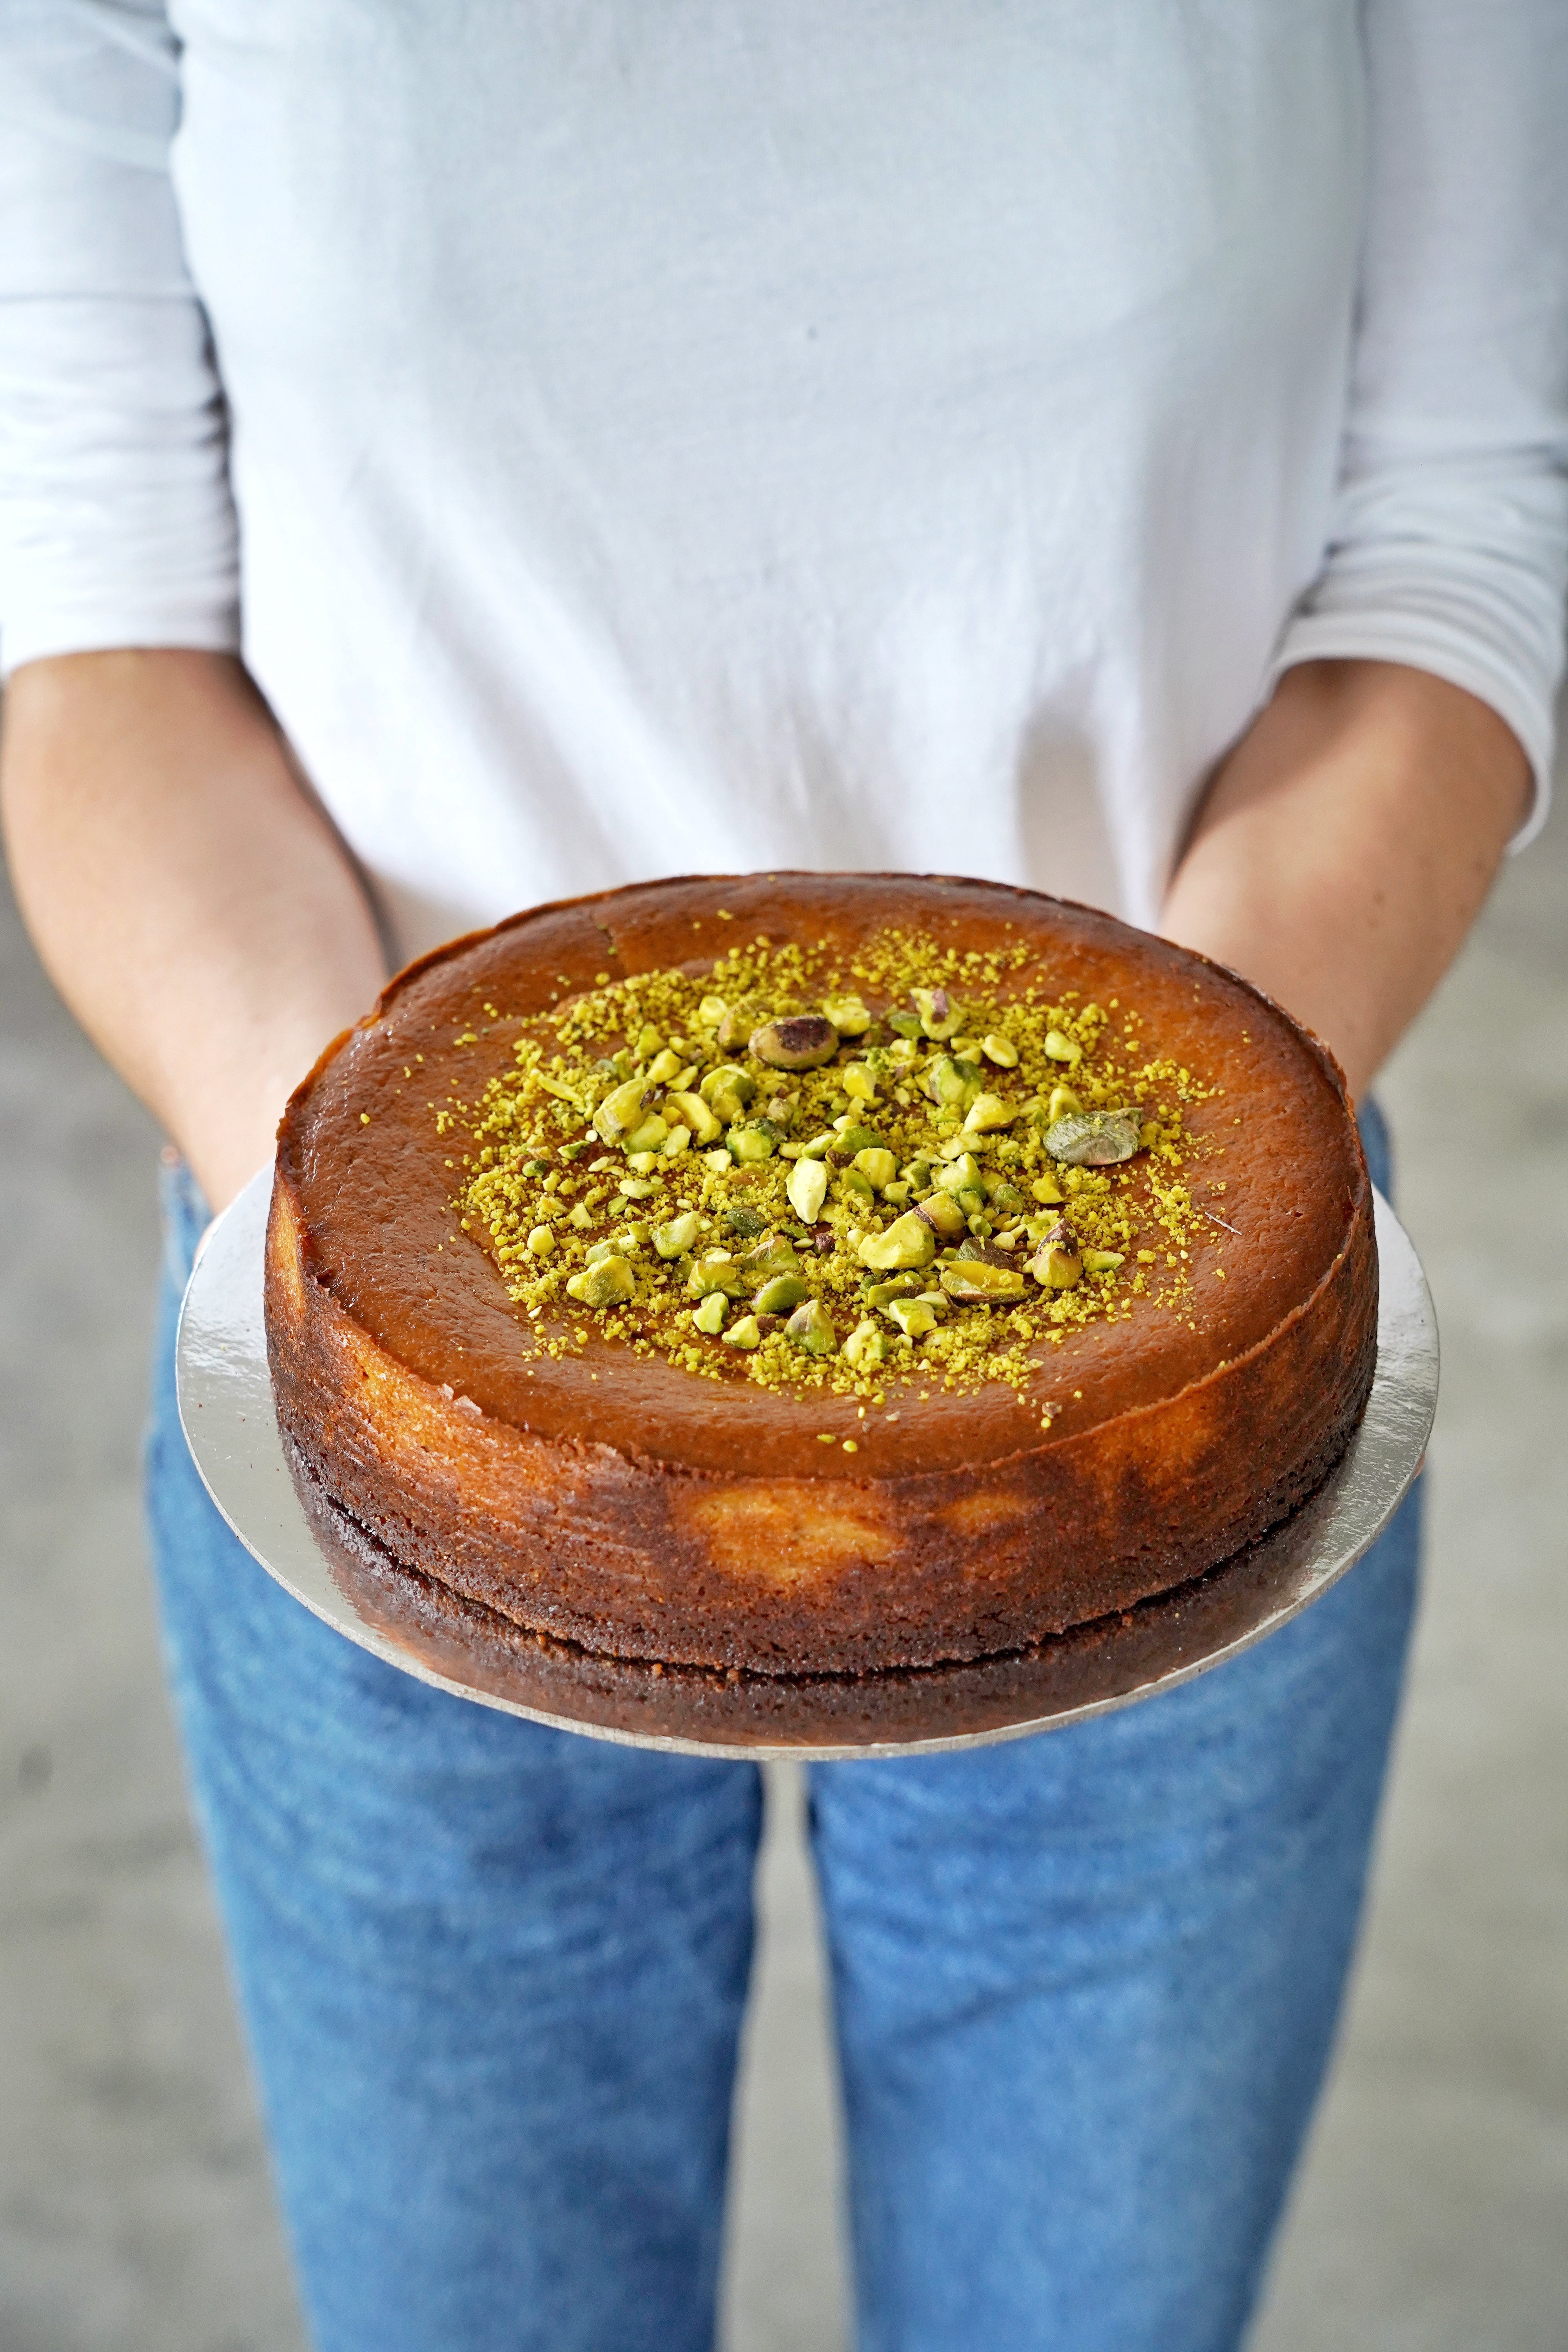 Persian Love Cake Recipe With Rose Water | The Foodie Affair